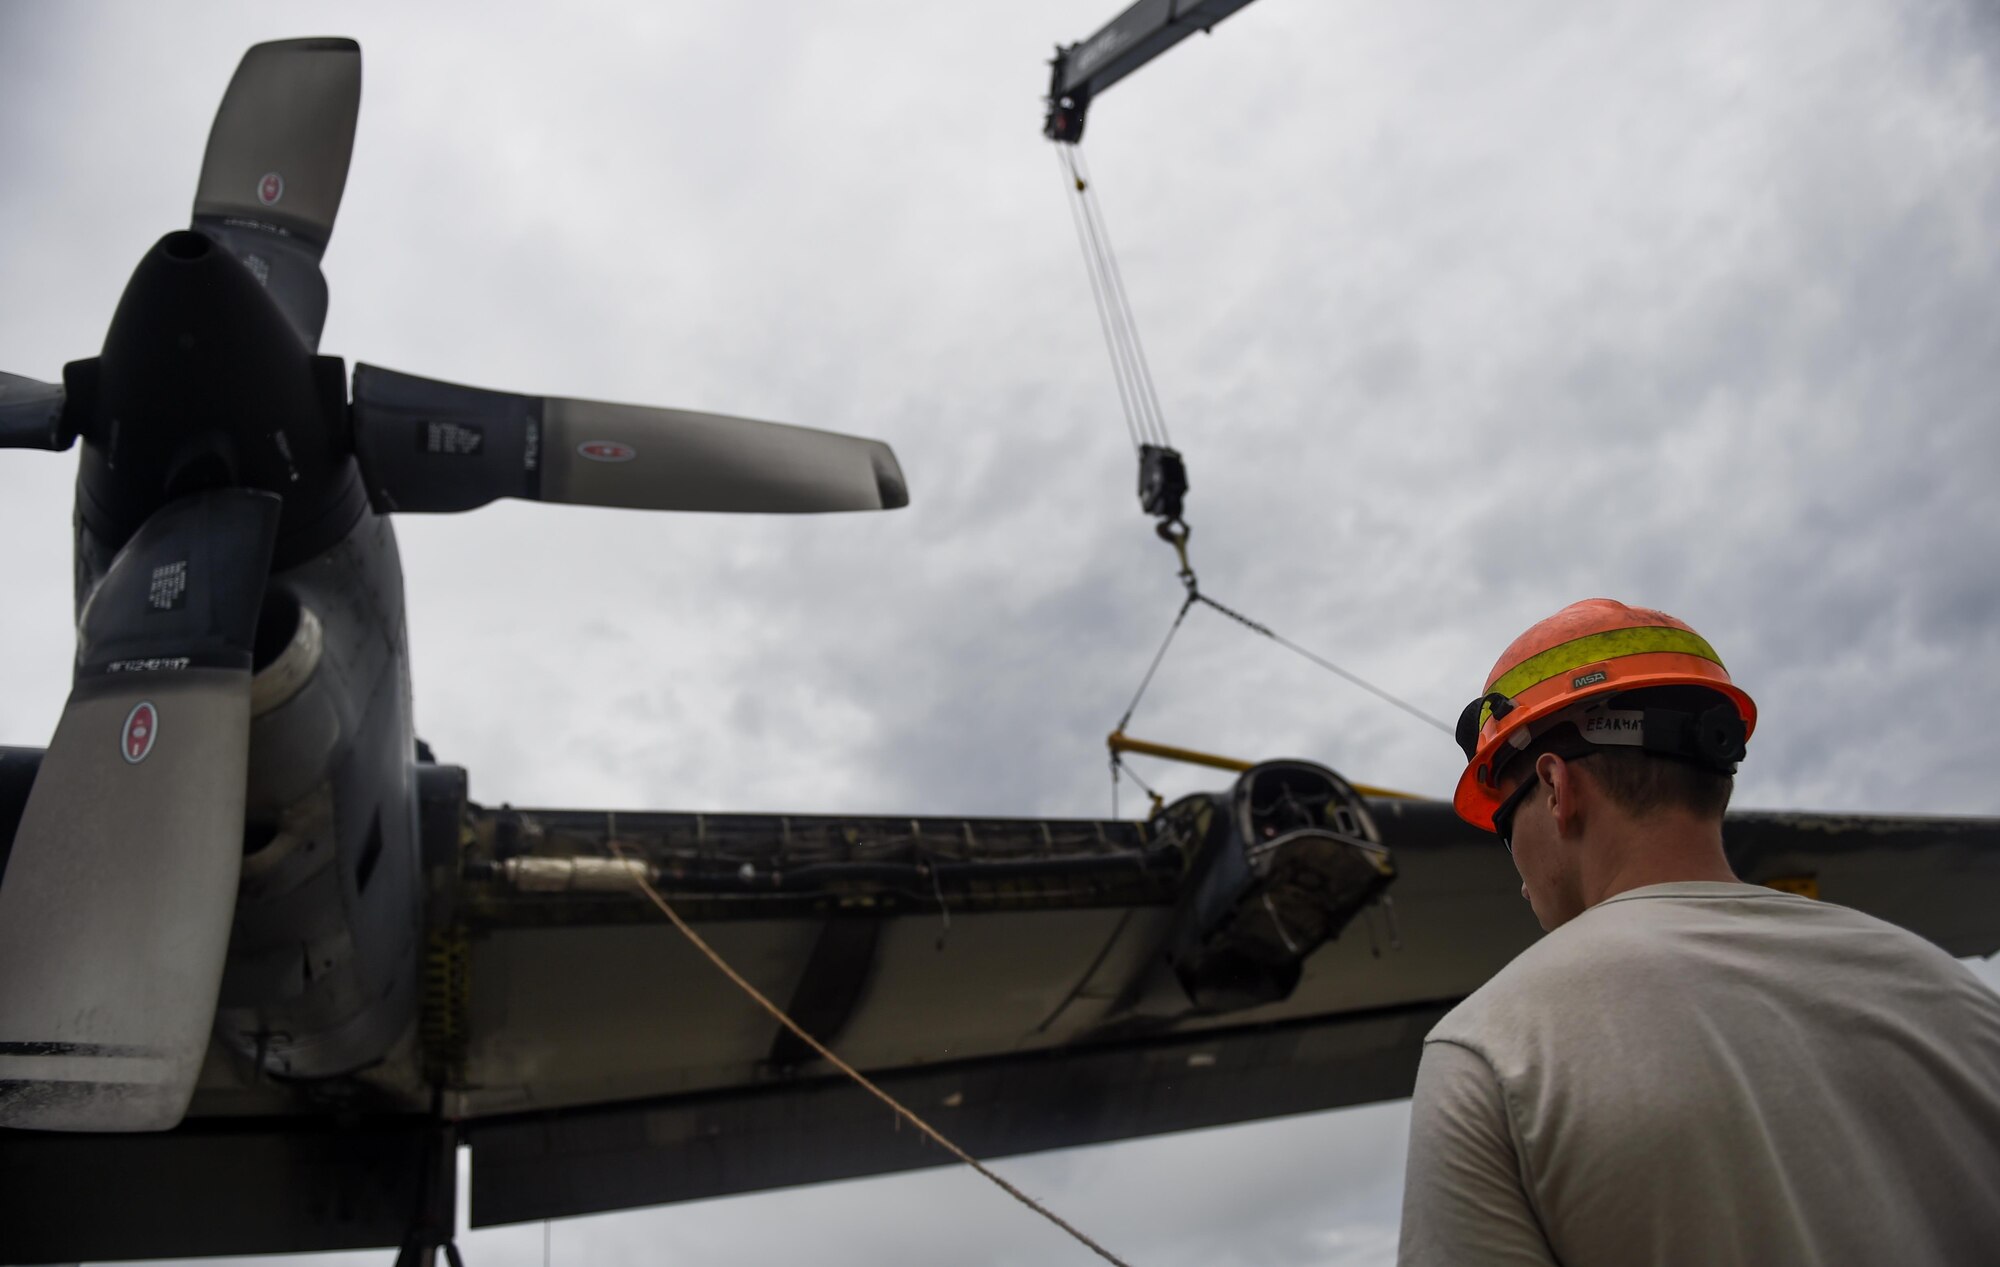 An Airman with the 402nd Expeditionary Maintenance team, Robins Air Force Base, Ga., guides the removal of an MC-130P Combat Shadow wing at Hurlburt Field, Fla., Aug. 5, 2015. The MC-130P Combat Shadow, “Team Shadow,” and an AC-130H Specter, “Wicked Wanda,” were towed to the Hurlburt Field Air Park Aug. 15, 2015.  (U.S. Air Force photo by Airman Kai White/Released)